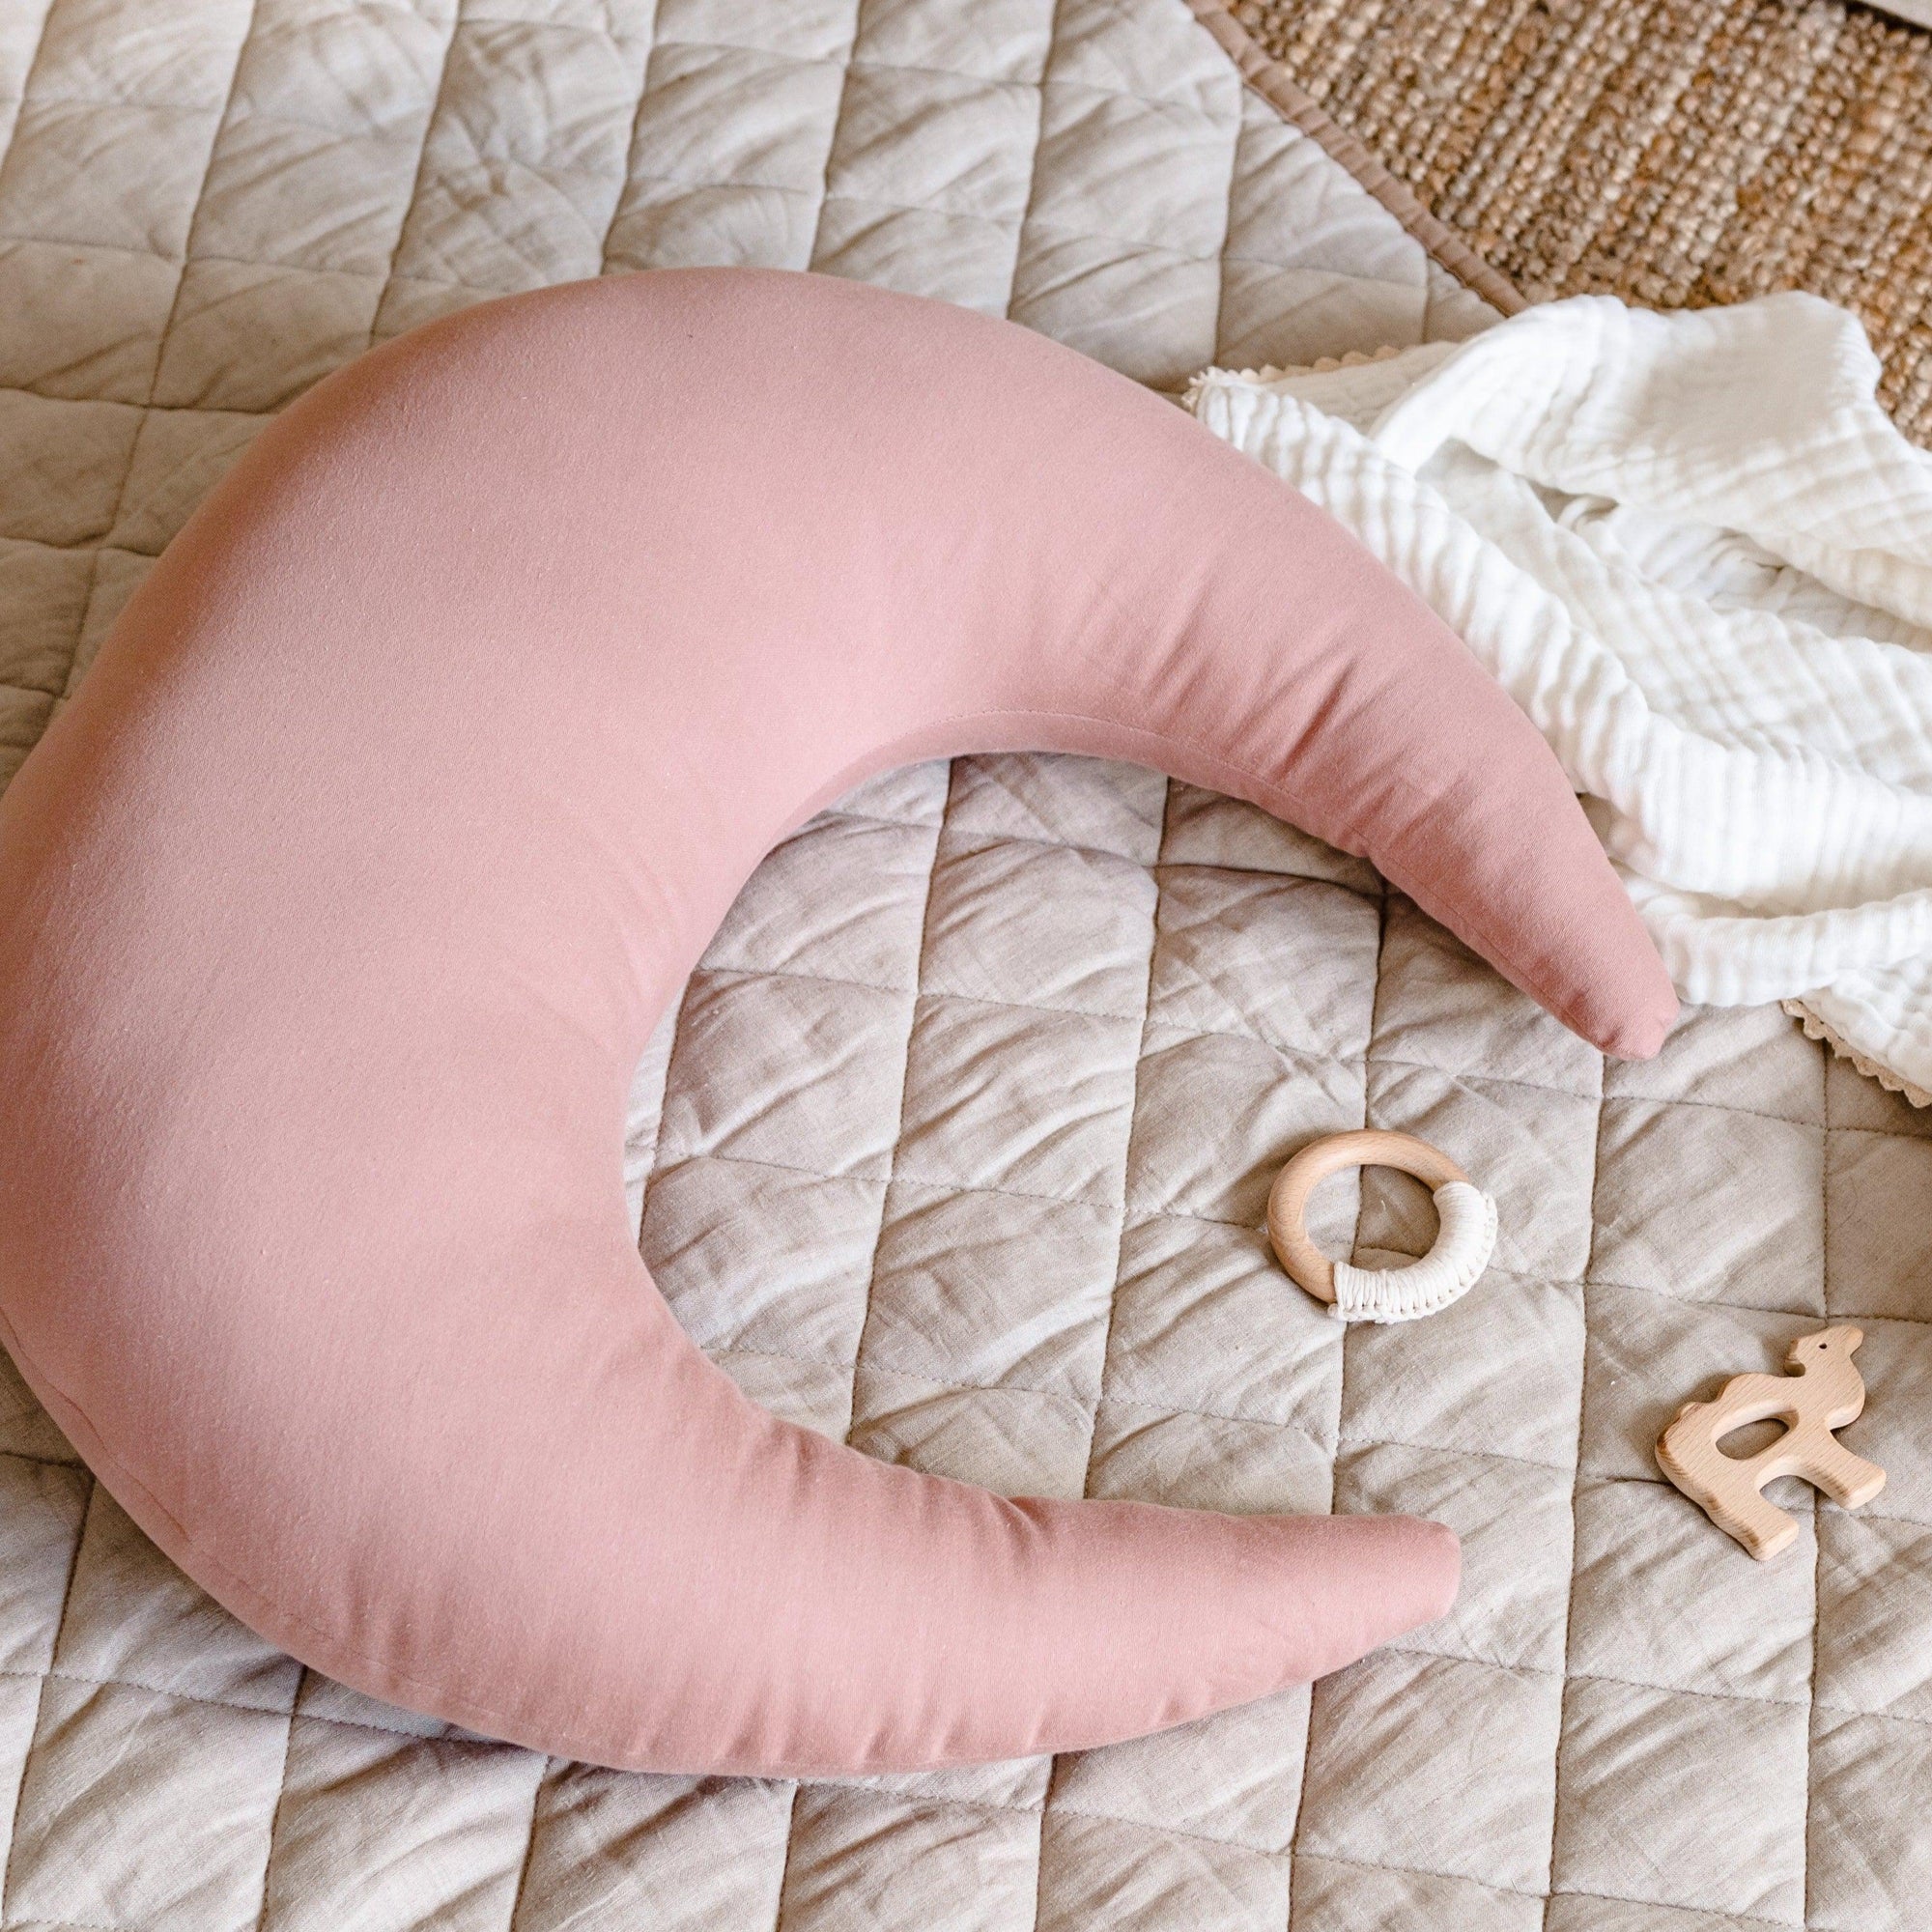 A crescent-shaped Feeding & Support Pillow by Snuggle Me in the shade Gumdrop on a baby mat.